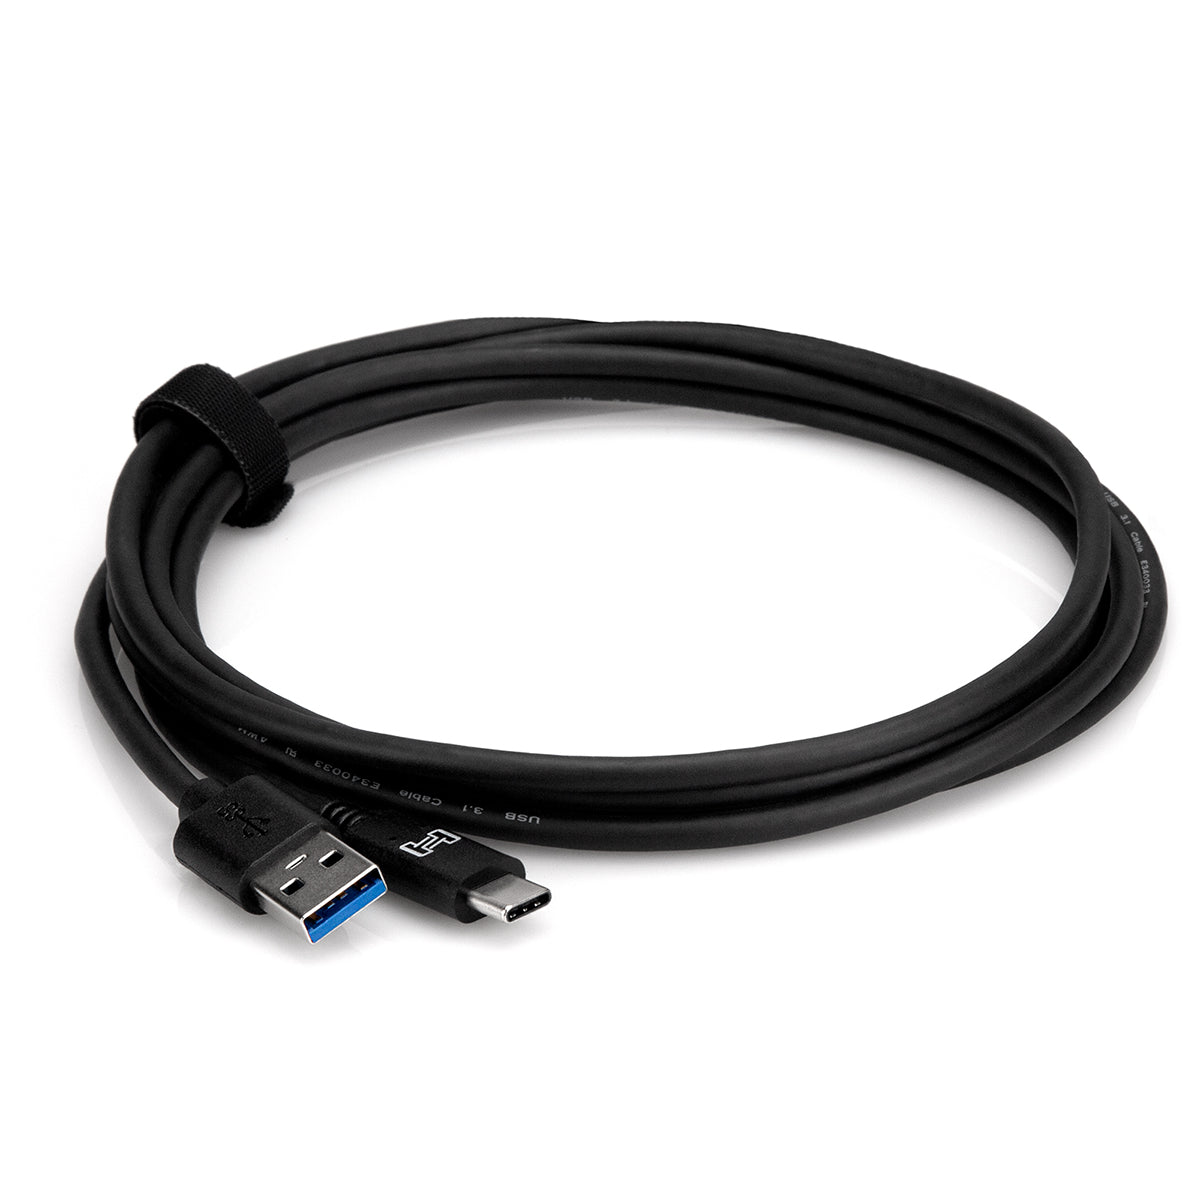 Hosa USB-306CA 6ft Superspeed USB 3.0 Type A to Type C